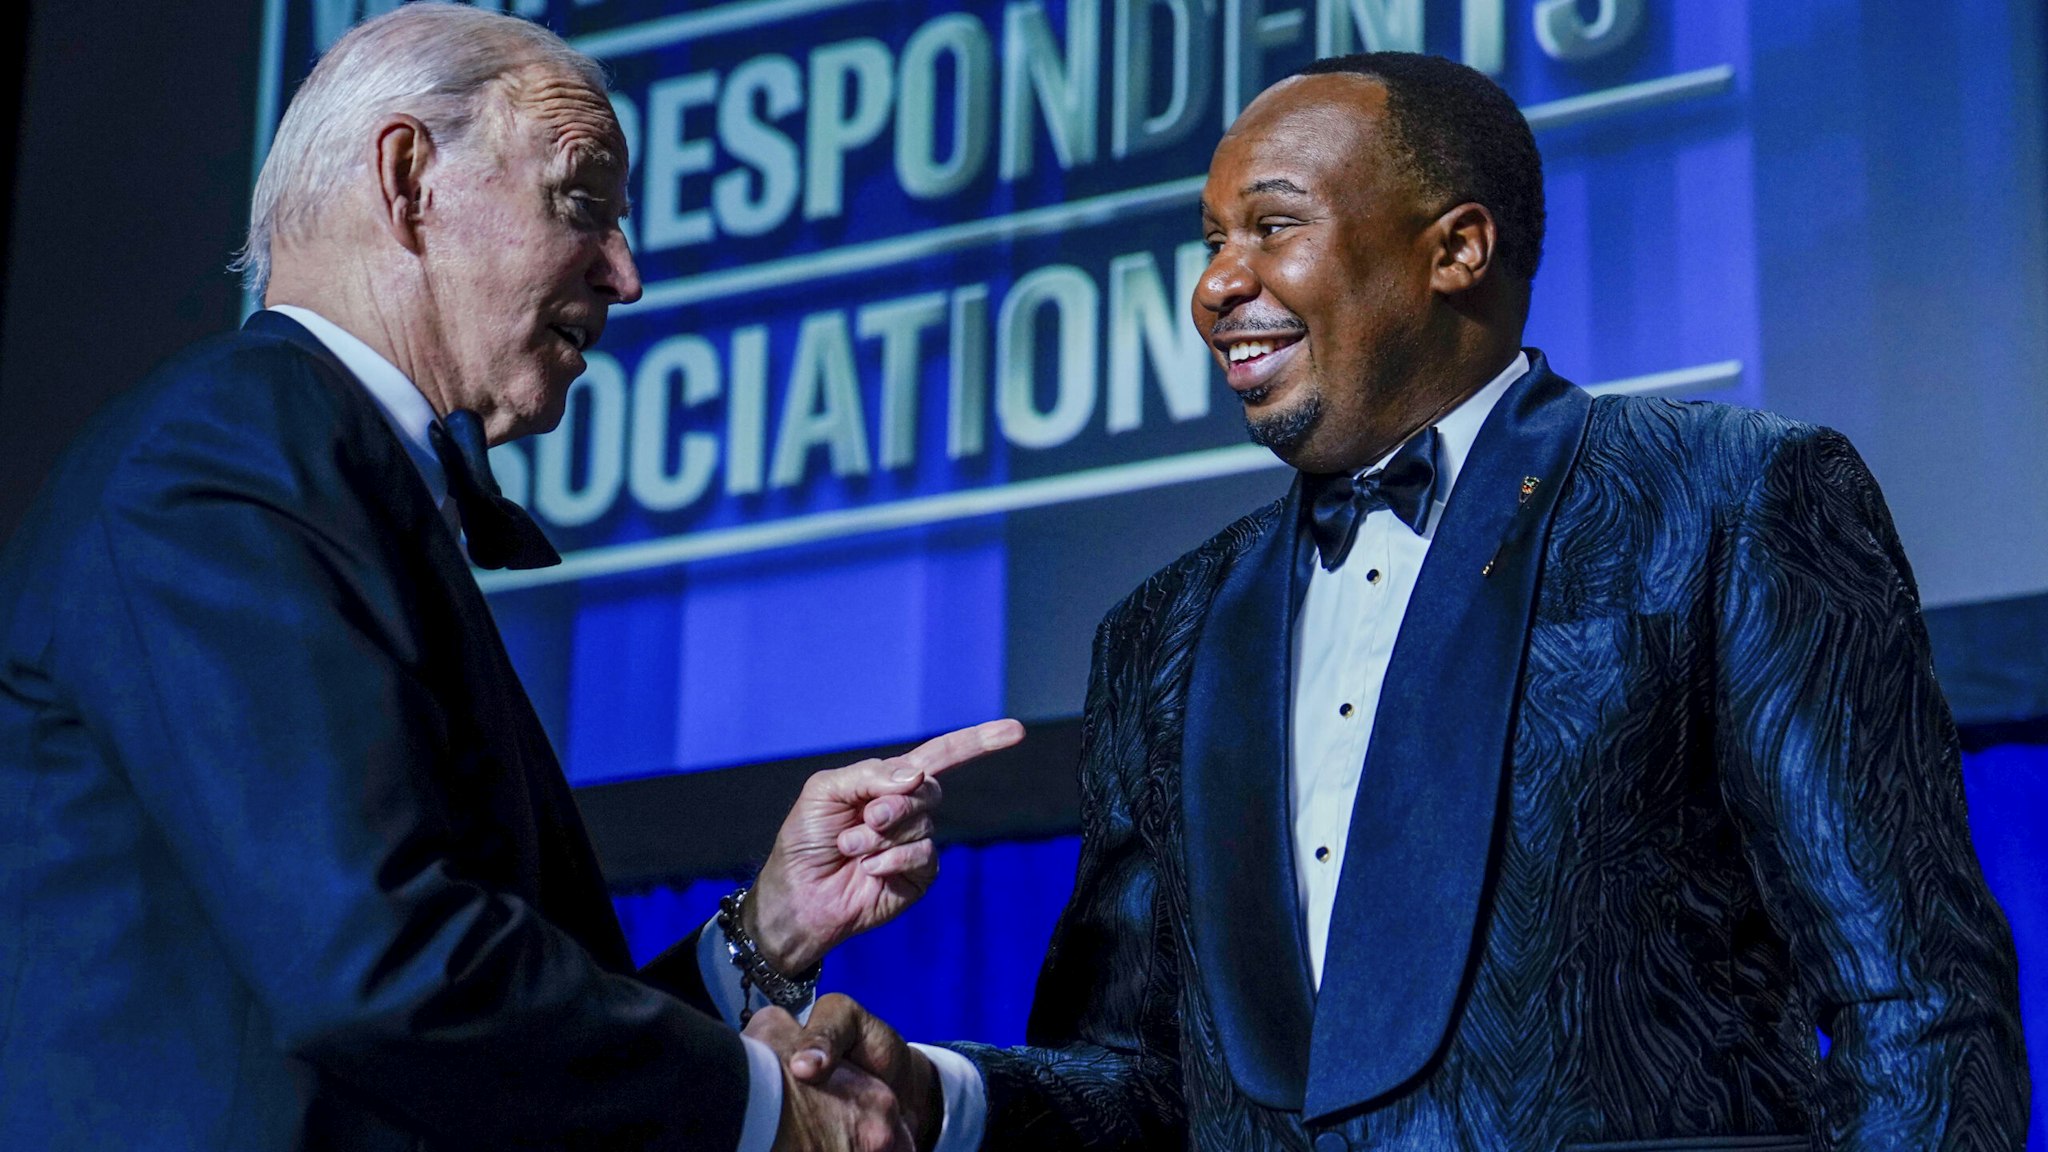 US President Joe Biden, left, shakes hands with comedian Roy Wood Jr. during the White House Correspondents' Association (WHCA) dinner in Washington, DC, US, on Saturday, April 29, 2023. The annual dinner raises money for WHCA scholarships and honors the recipients of the organization's journalism awards.